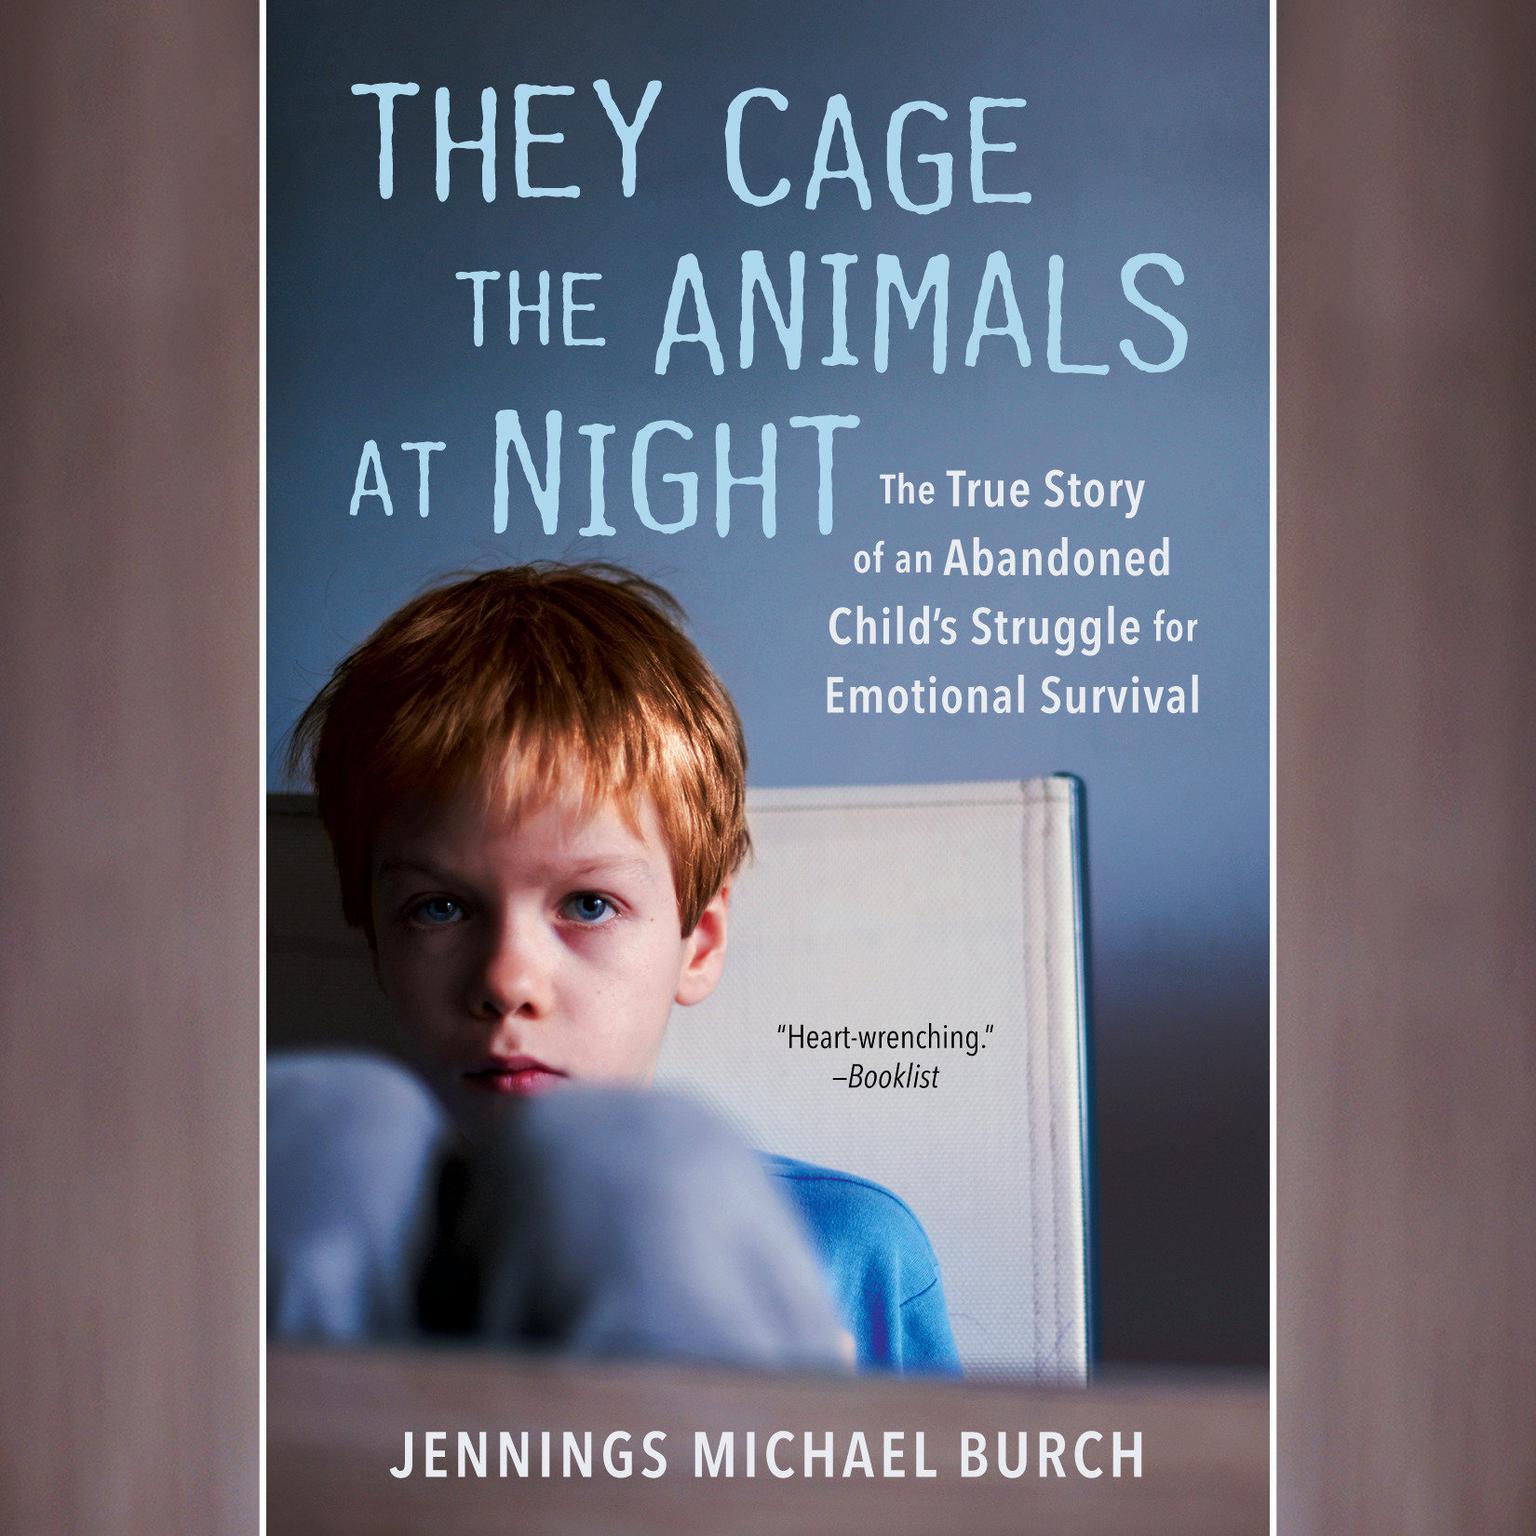 They Cage the Animals at Night: The True Story of an Abandoned Childs Struggle for Emotional Survival Audiobook, by Jennings Michael Burch